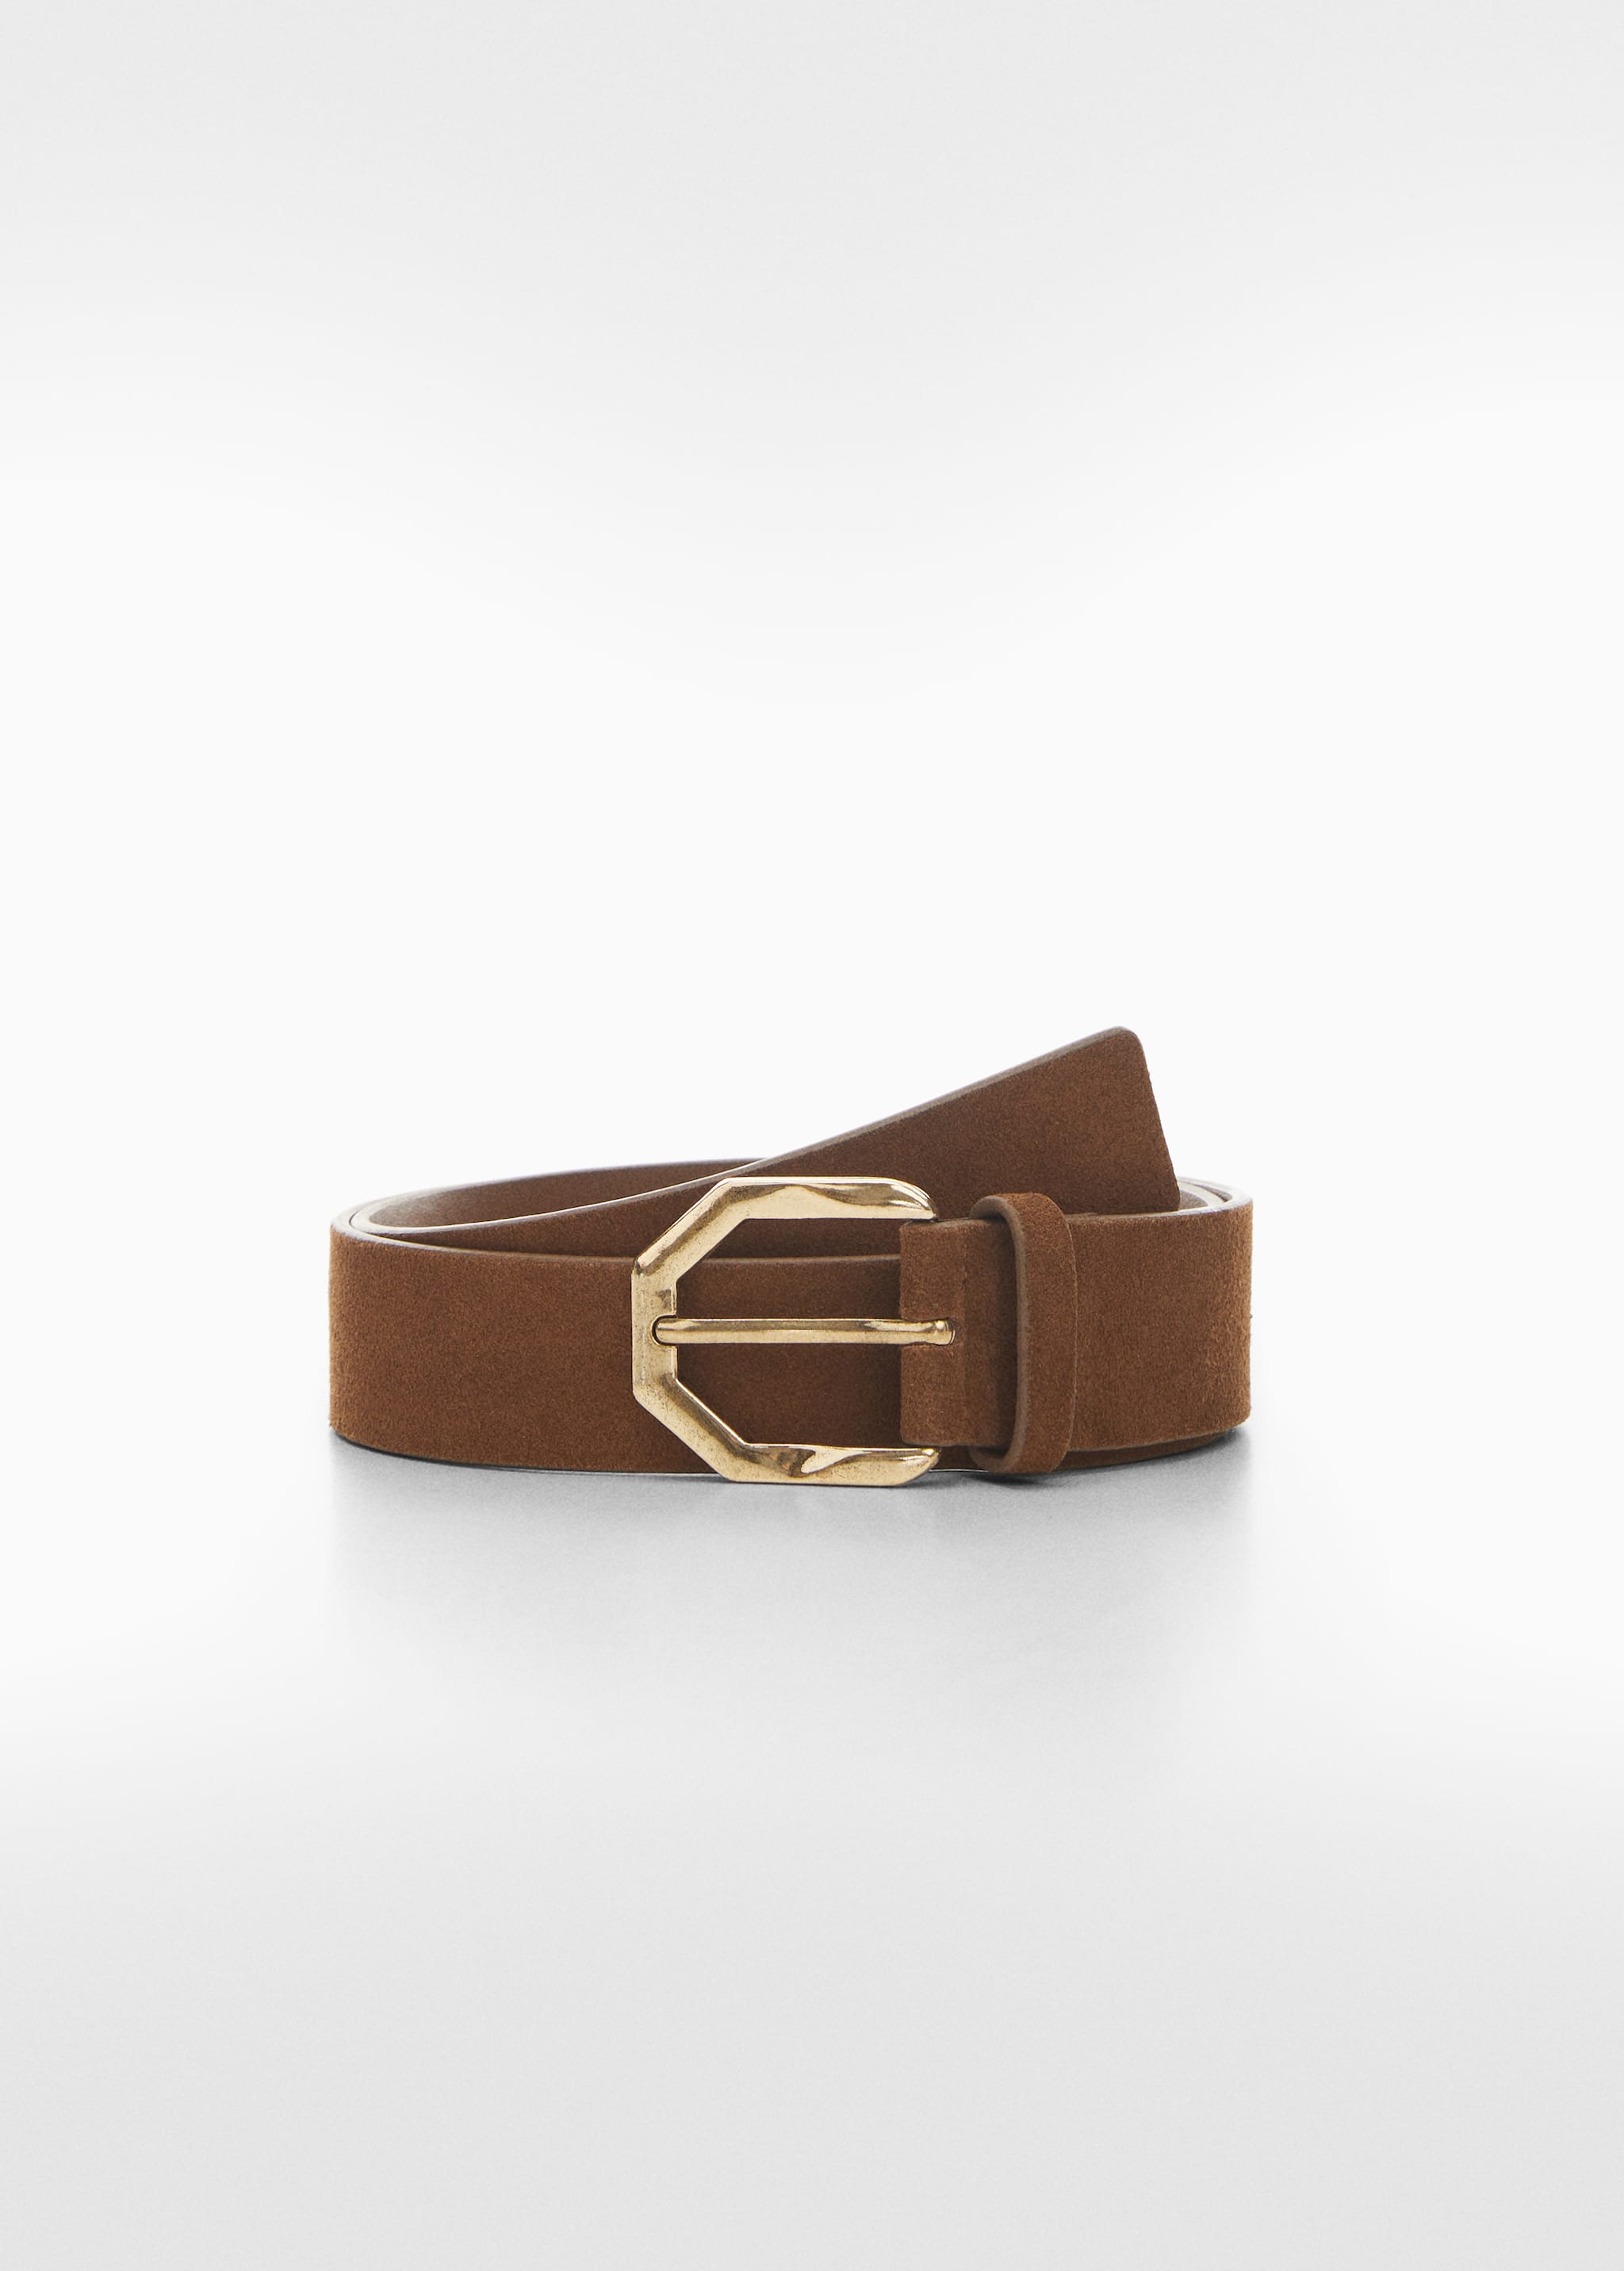 Irregular buckle leather belt - Article without model